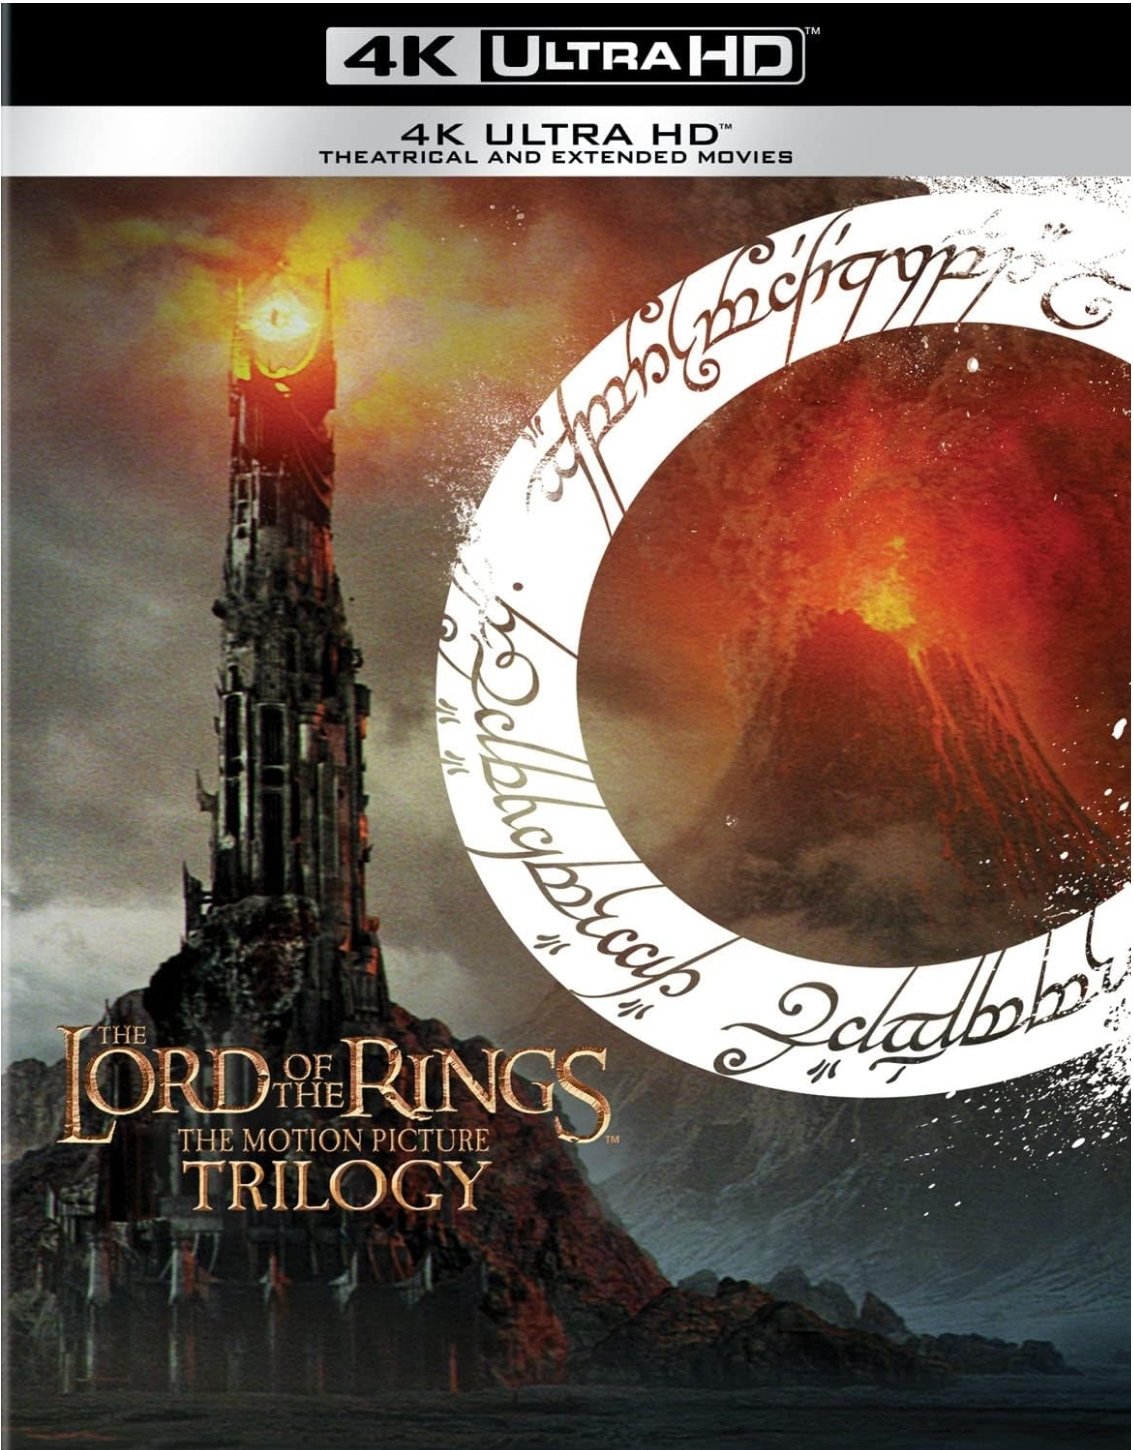 THE LORD OF THE RING TRILOGY BLU-RAY 4K - EASY GAMES